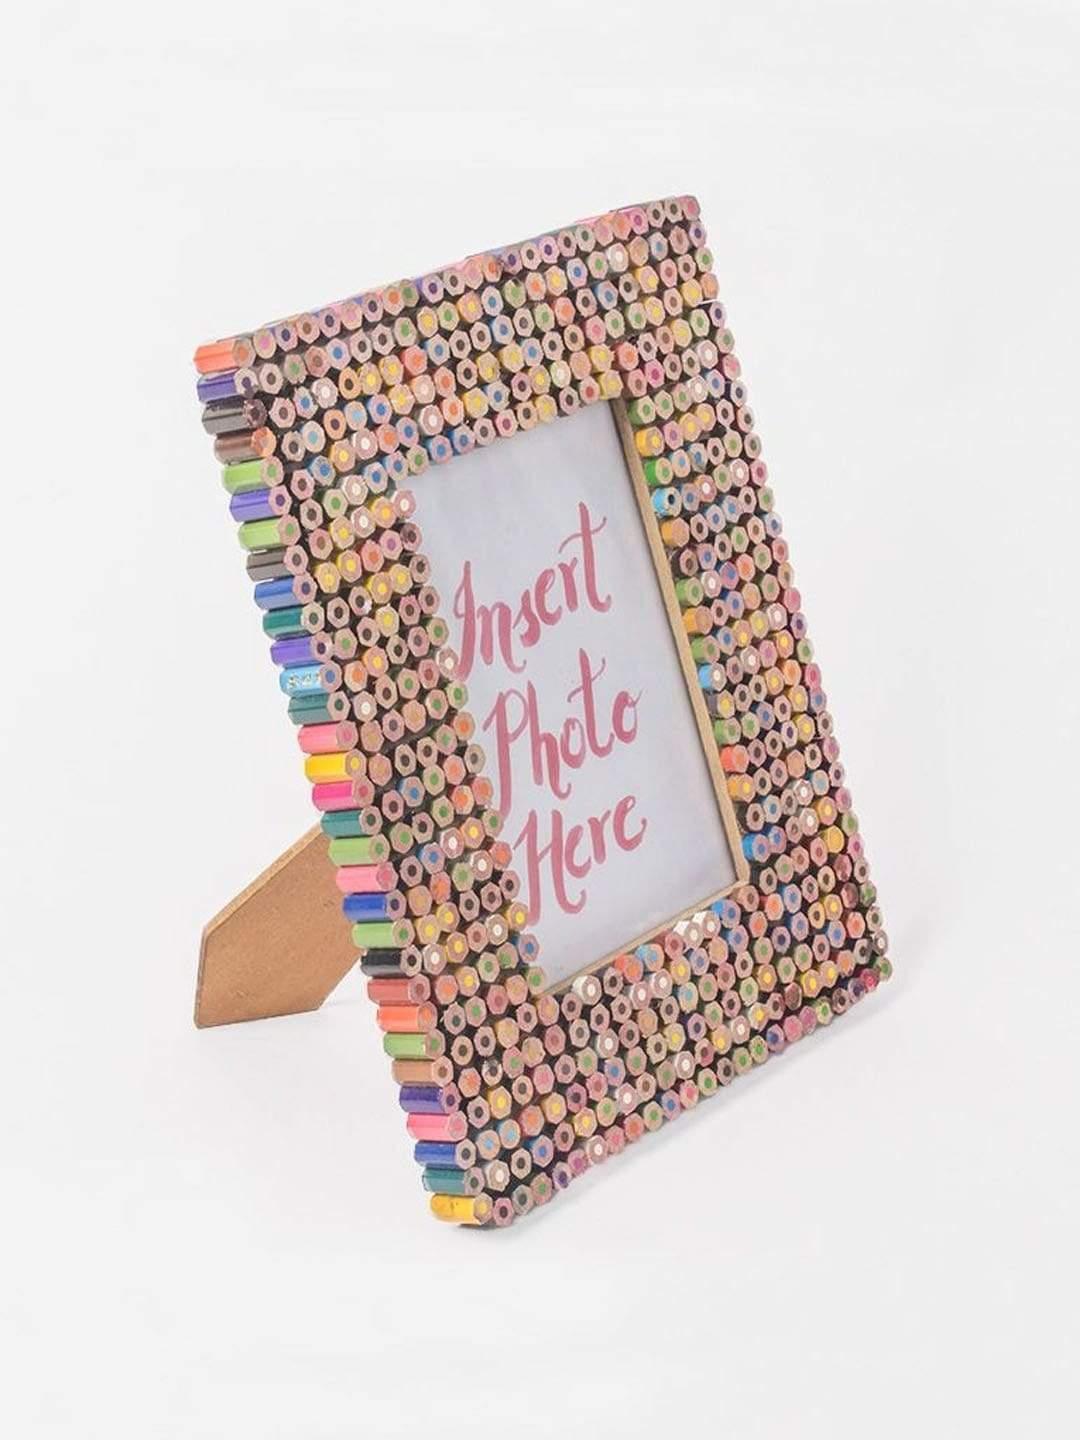 Color Pencils Photo FrameMaterial: Made of Colored Pencils and Glass
Dimensions: Frame Size - 3L x 1W x 19H CMPhoto Size - 10L x 10H CM

Do not wash, Wipe dry, Keep away from dust and moistuColor Pencils Photo Frame